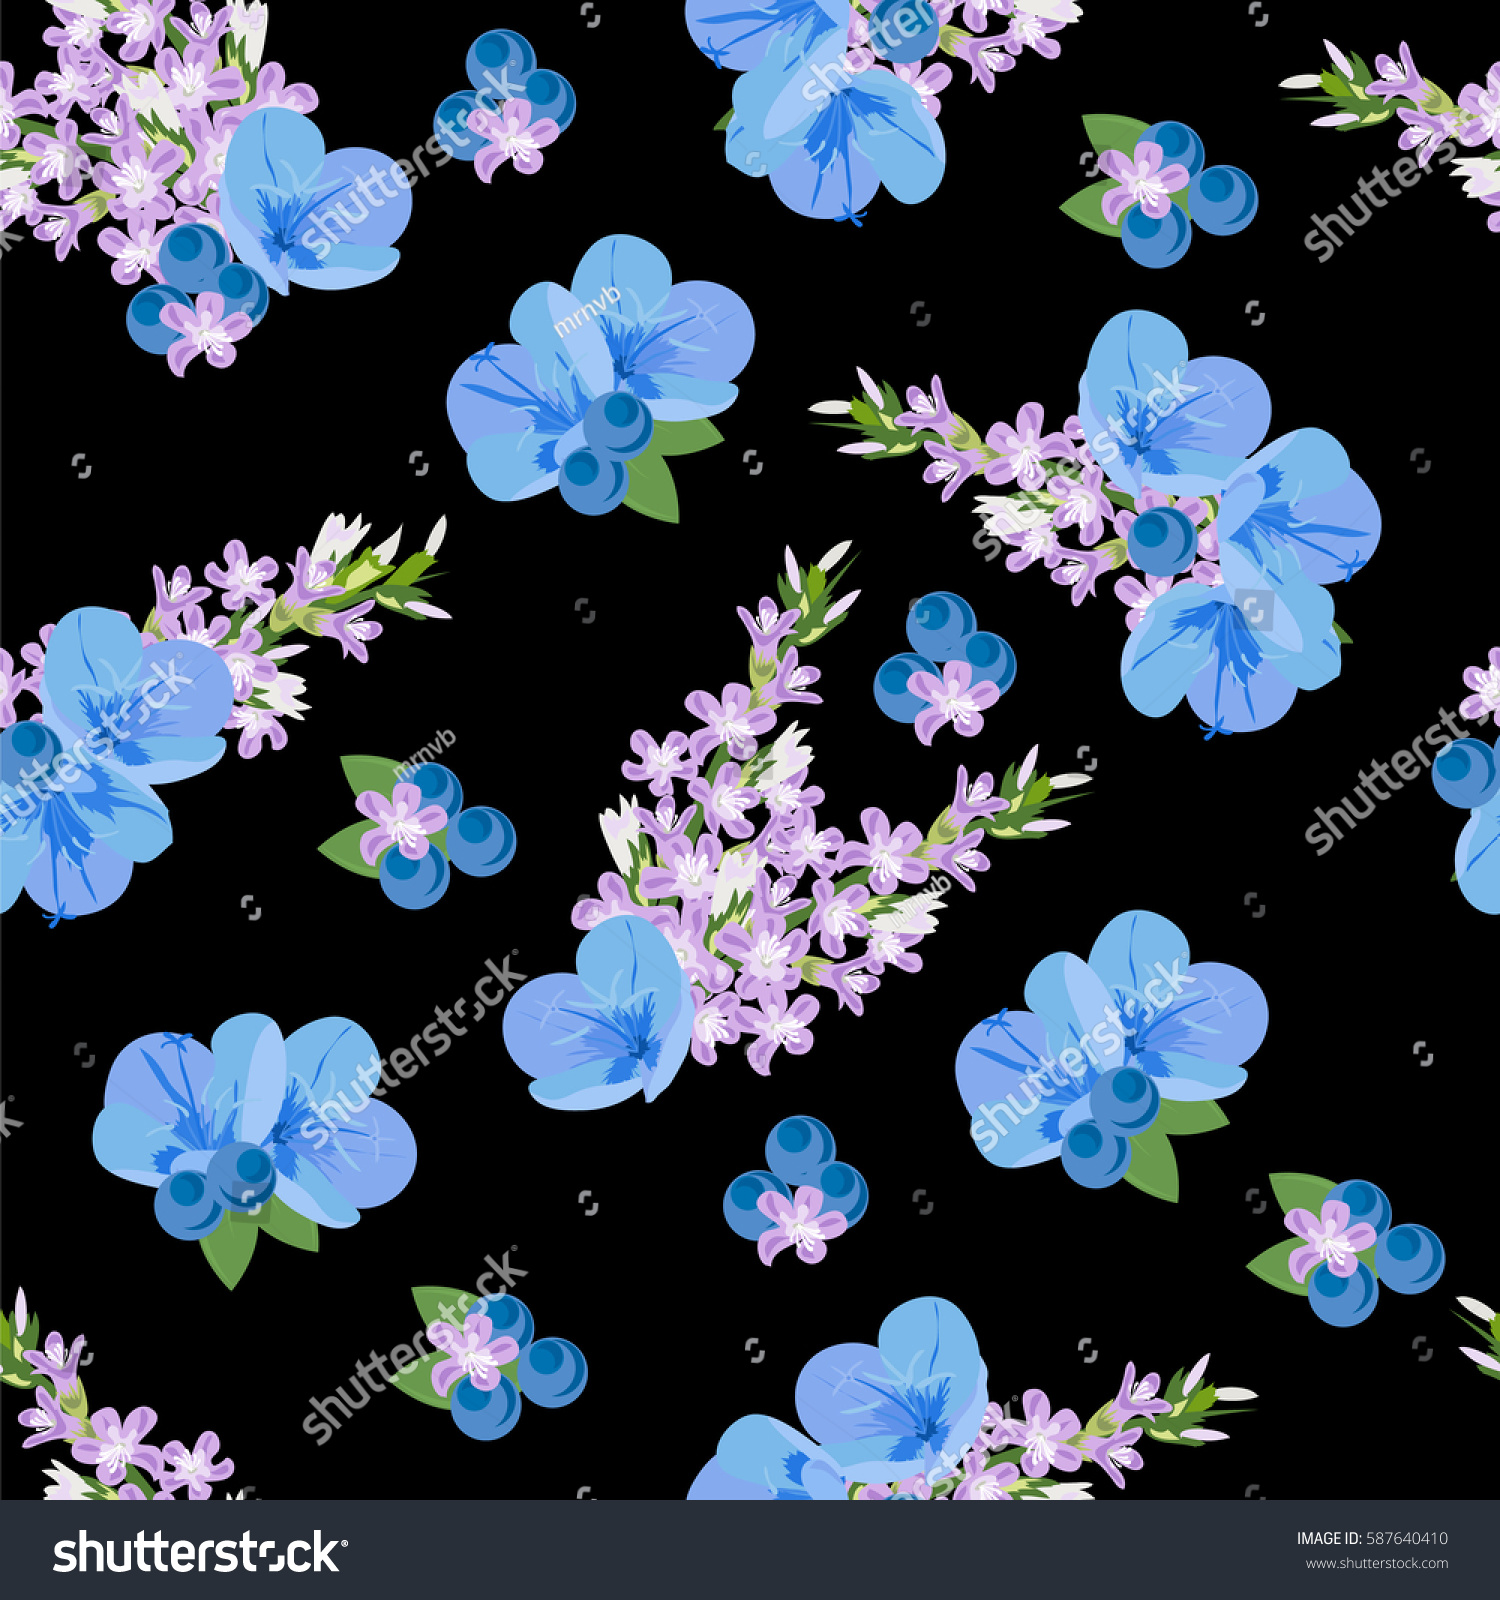 stock vector seamless floral pattern with cute blue flowers and berries on black background for textile cover 587640410